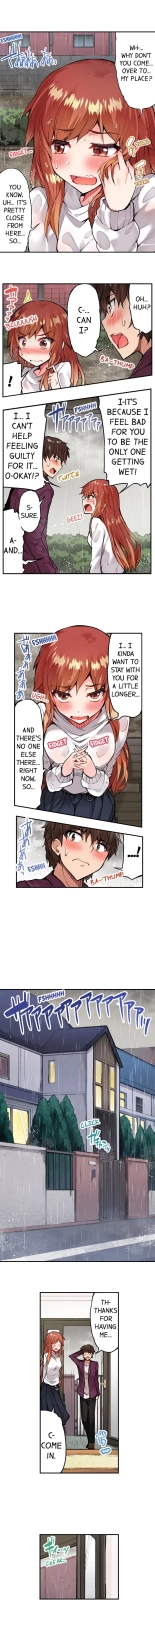 Traditional Job of Washing Girls' Body Ch. 1-181 : page 680